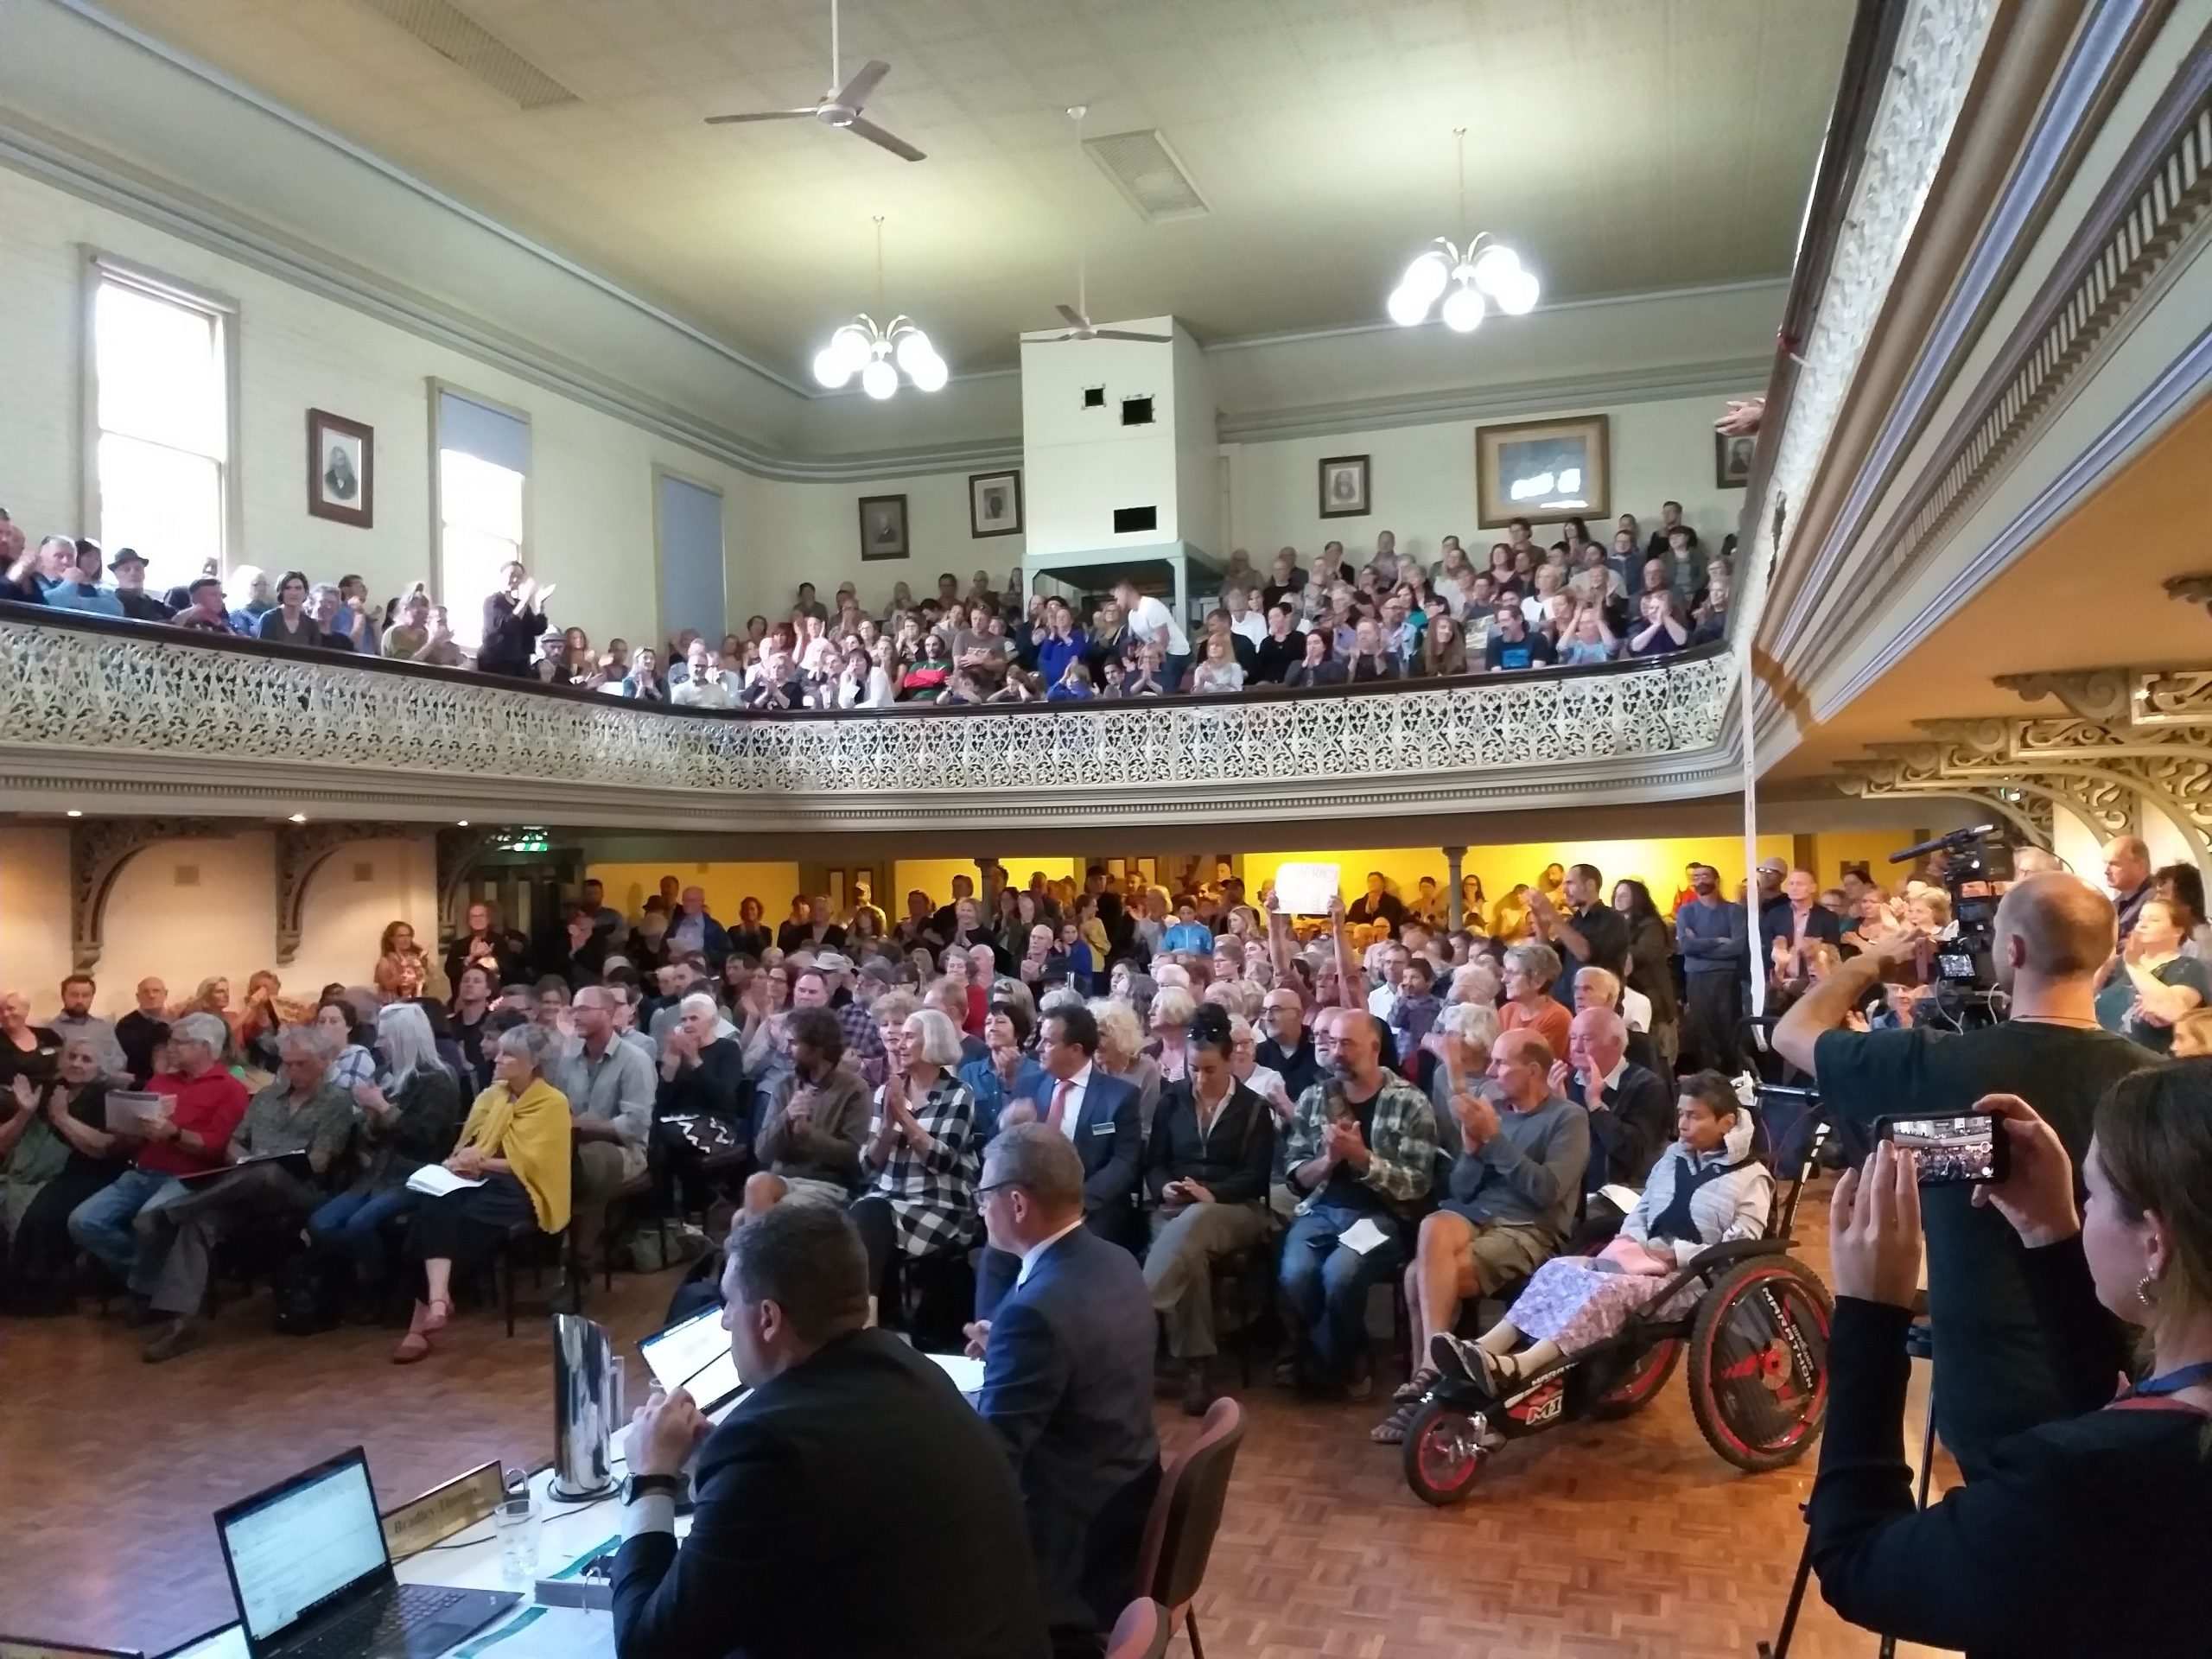 Perfect storm hits Daylesford Town Hall